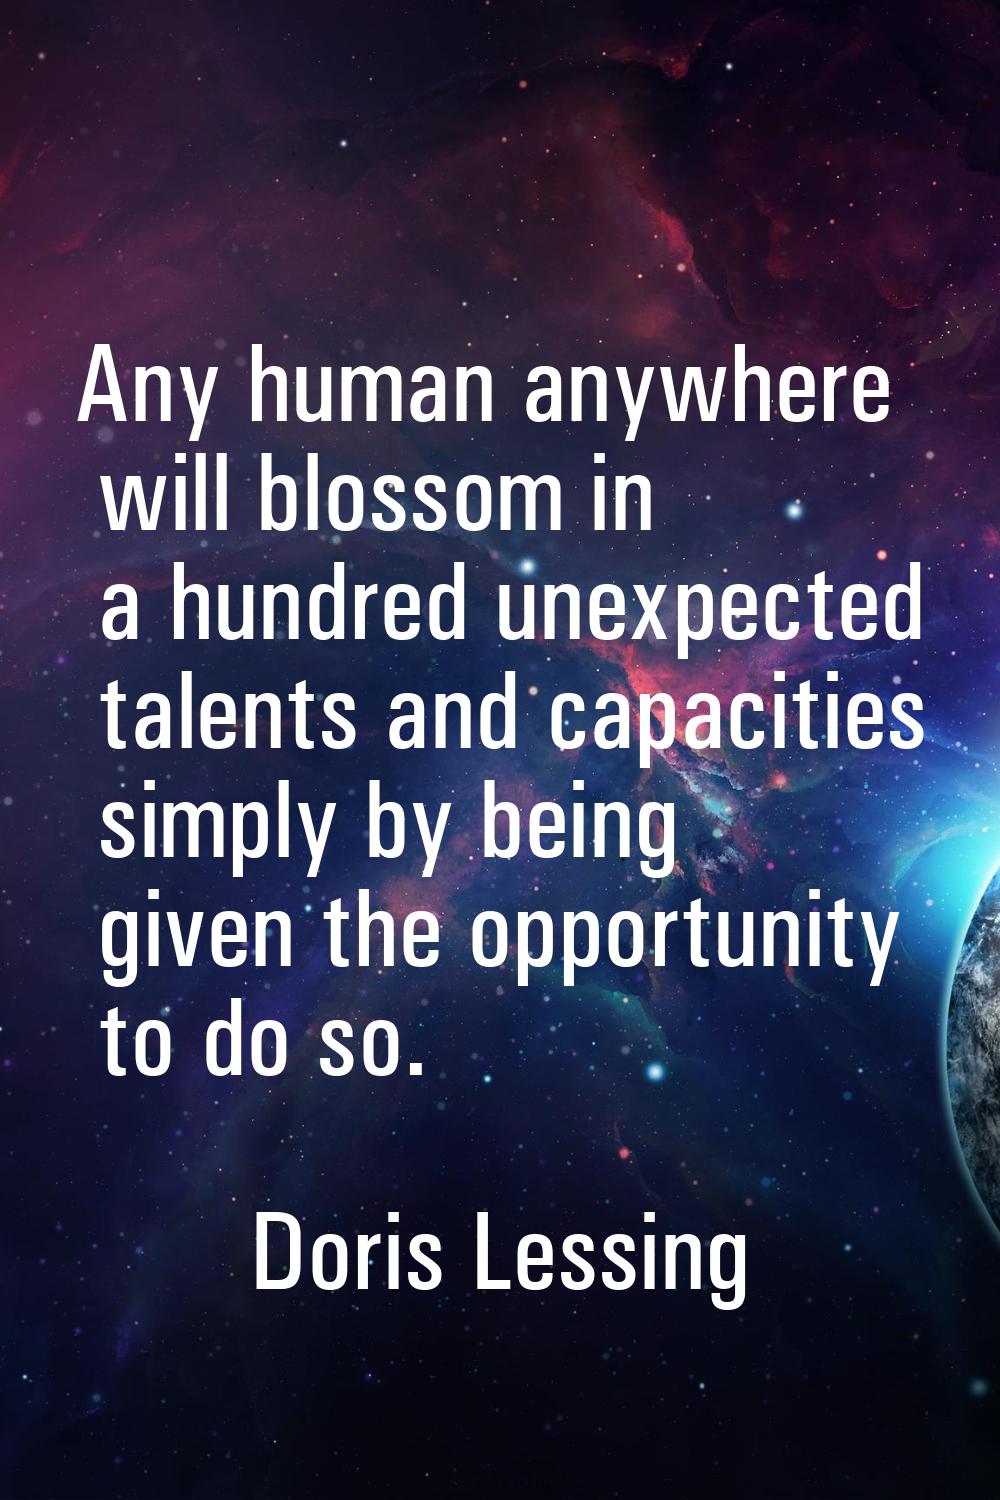 Any human anywhere will blossom in a hundred unexpected talents and capacities simply by being give